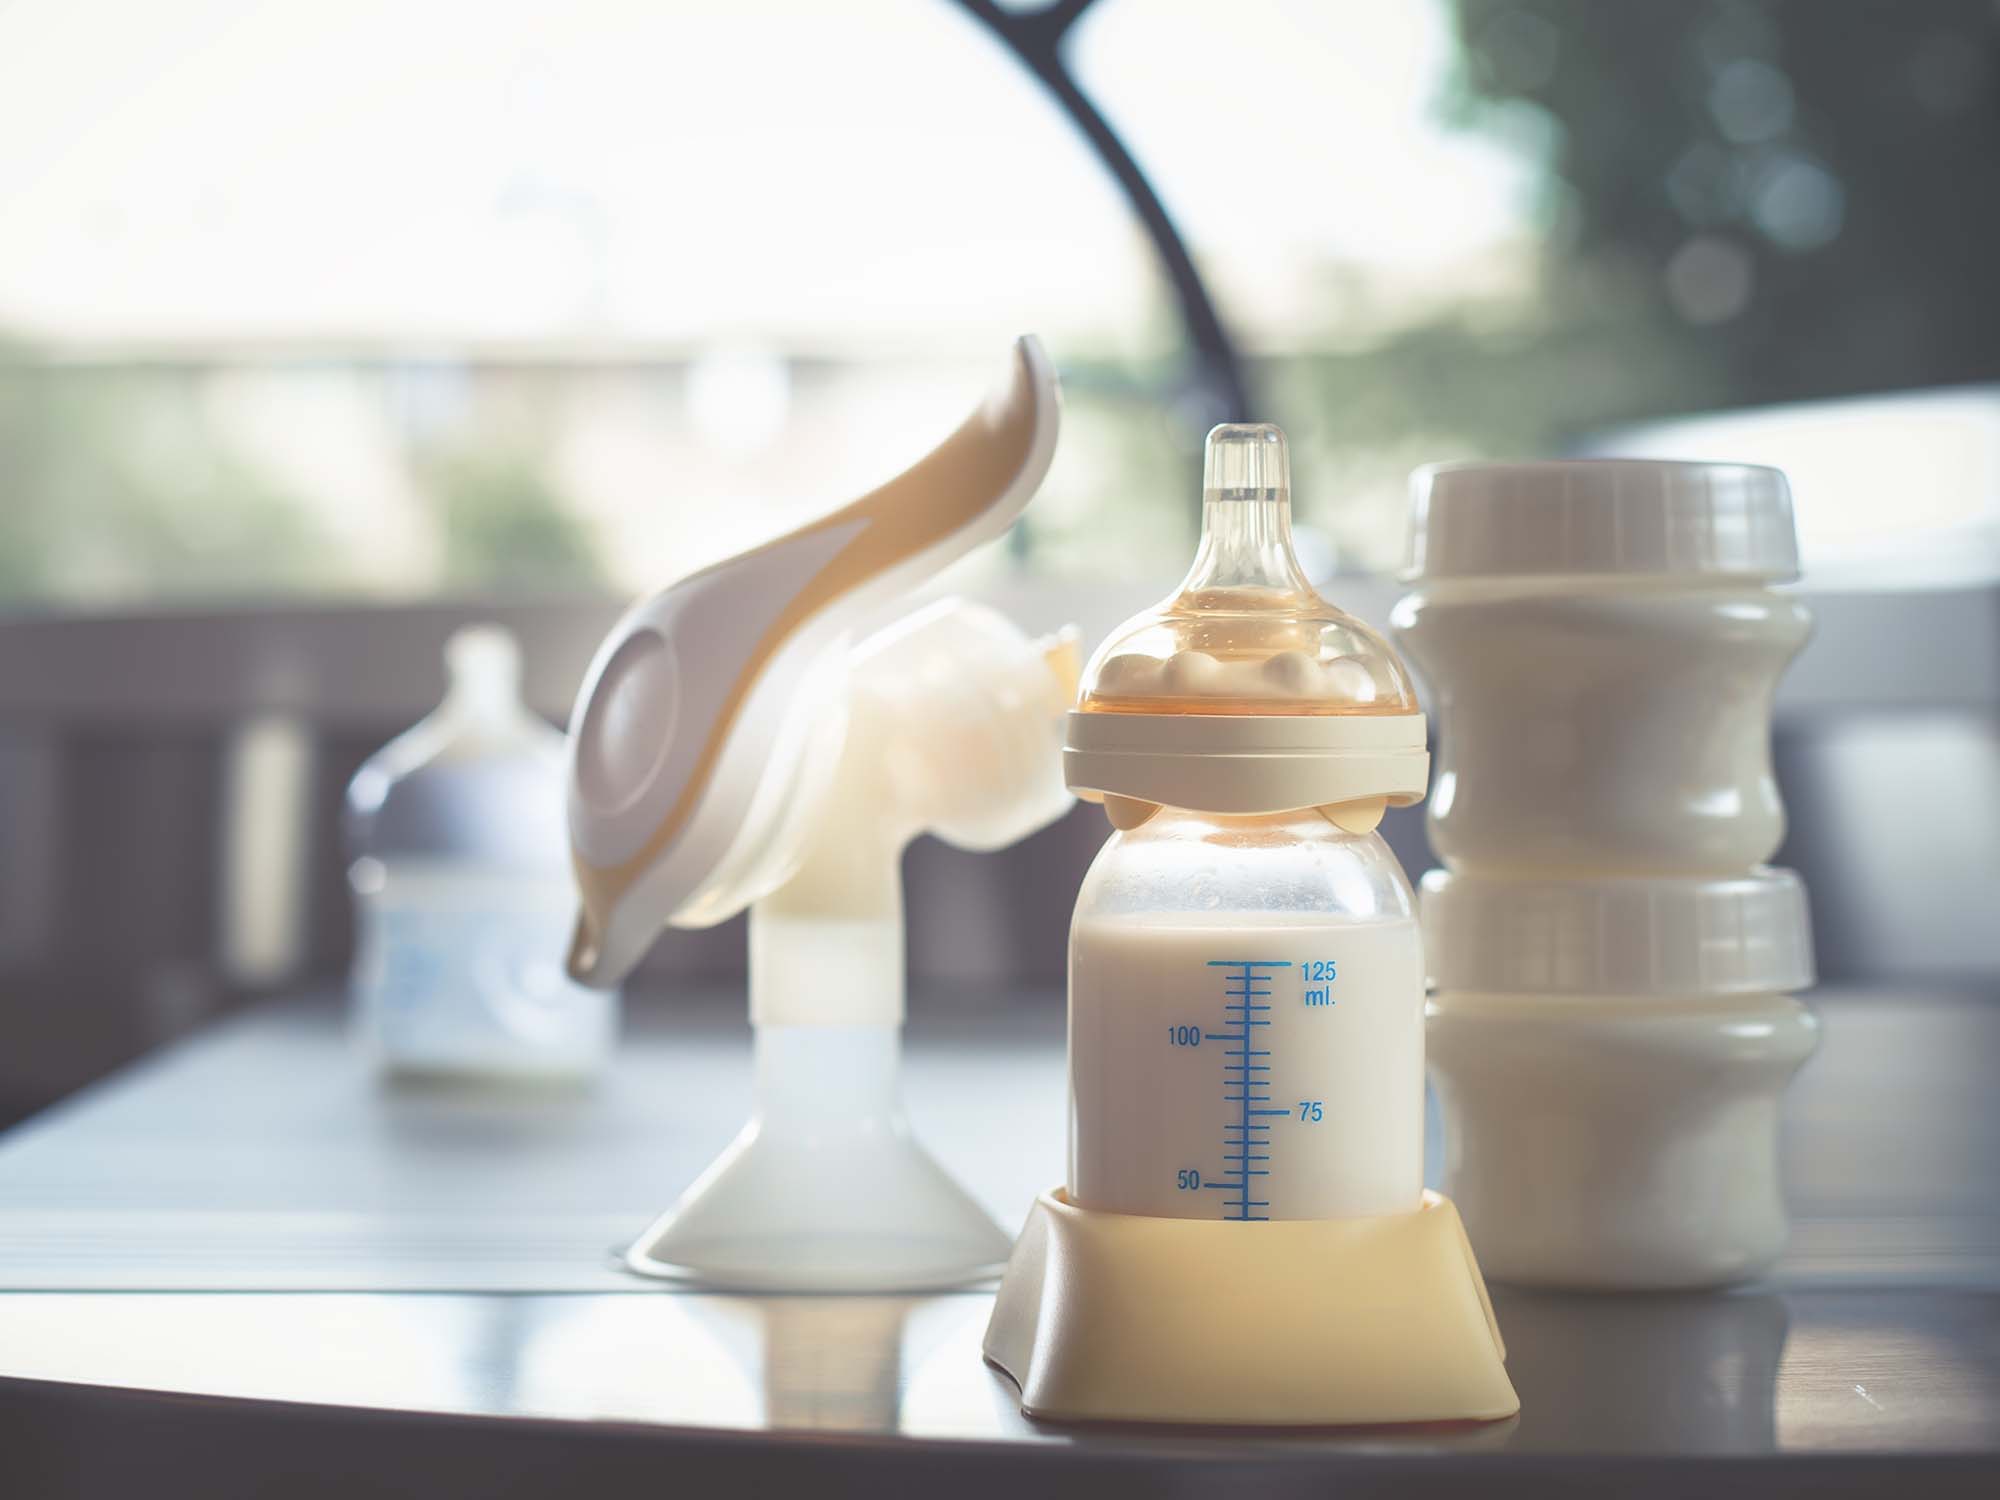 Breast pumps have barely evolved, but you can still make them better